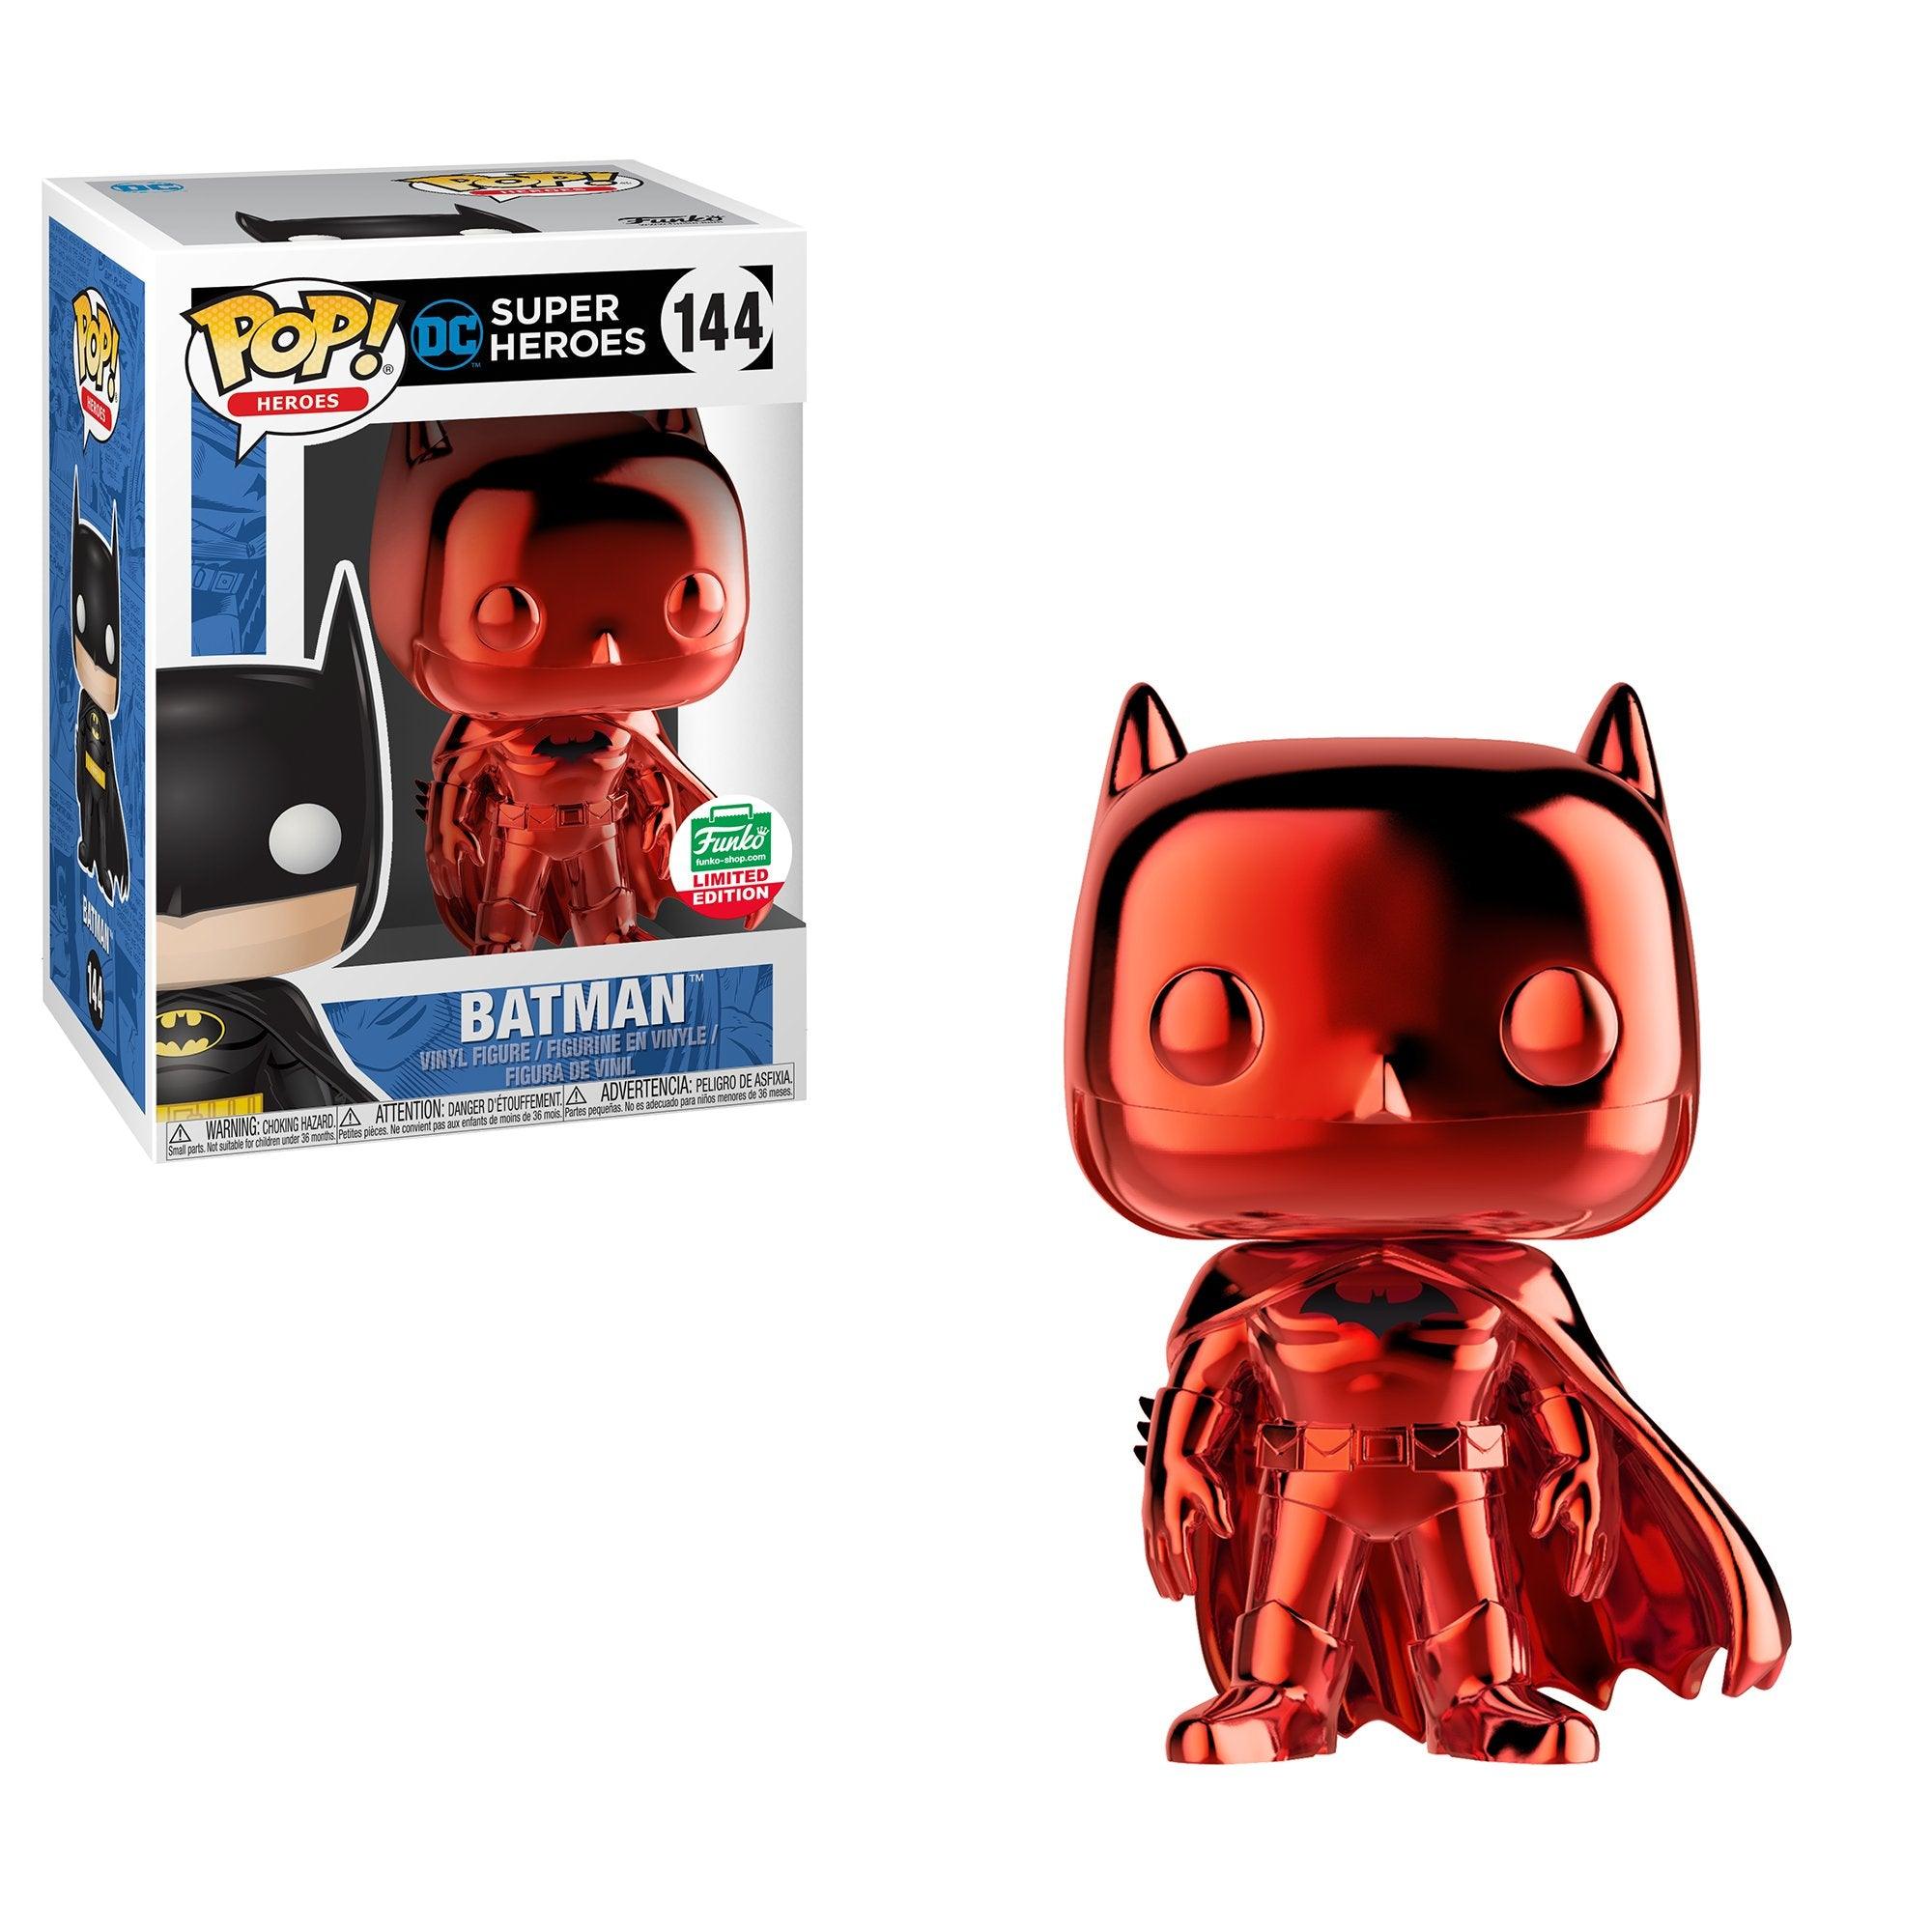 Pop! Heroes - DC Super Heroes - Batman - #144 - Red Chrome Color - Funko Store LIMITED Edition - Hobby Champion Inc